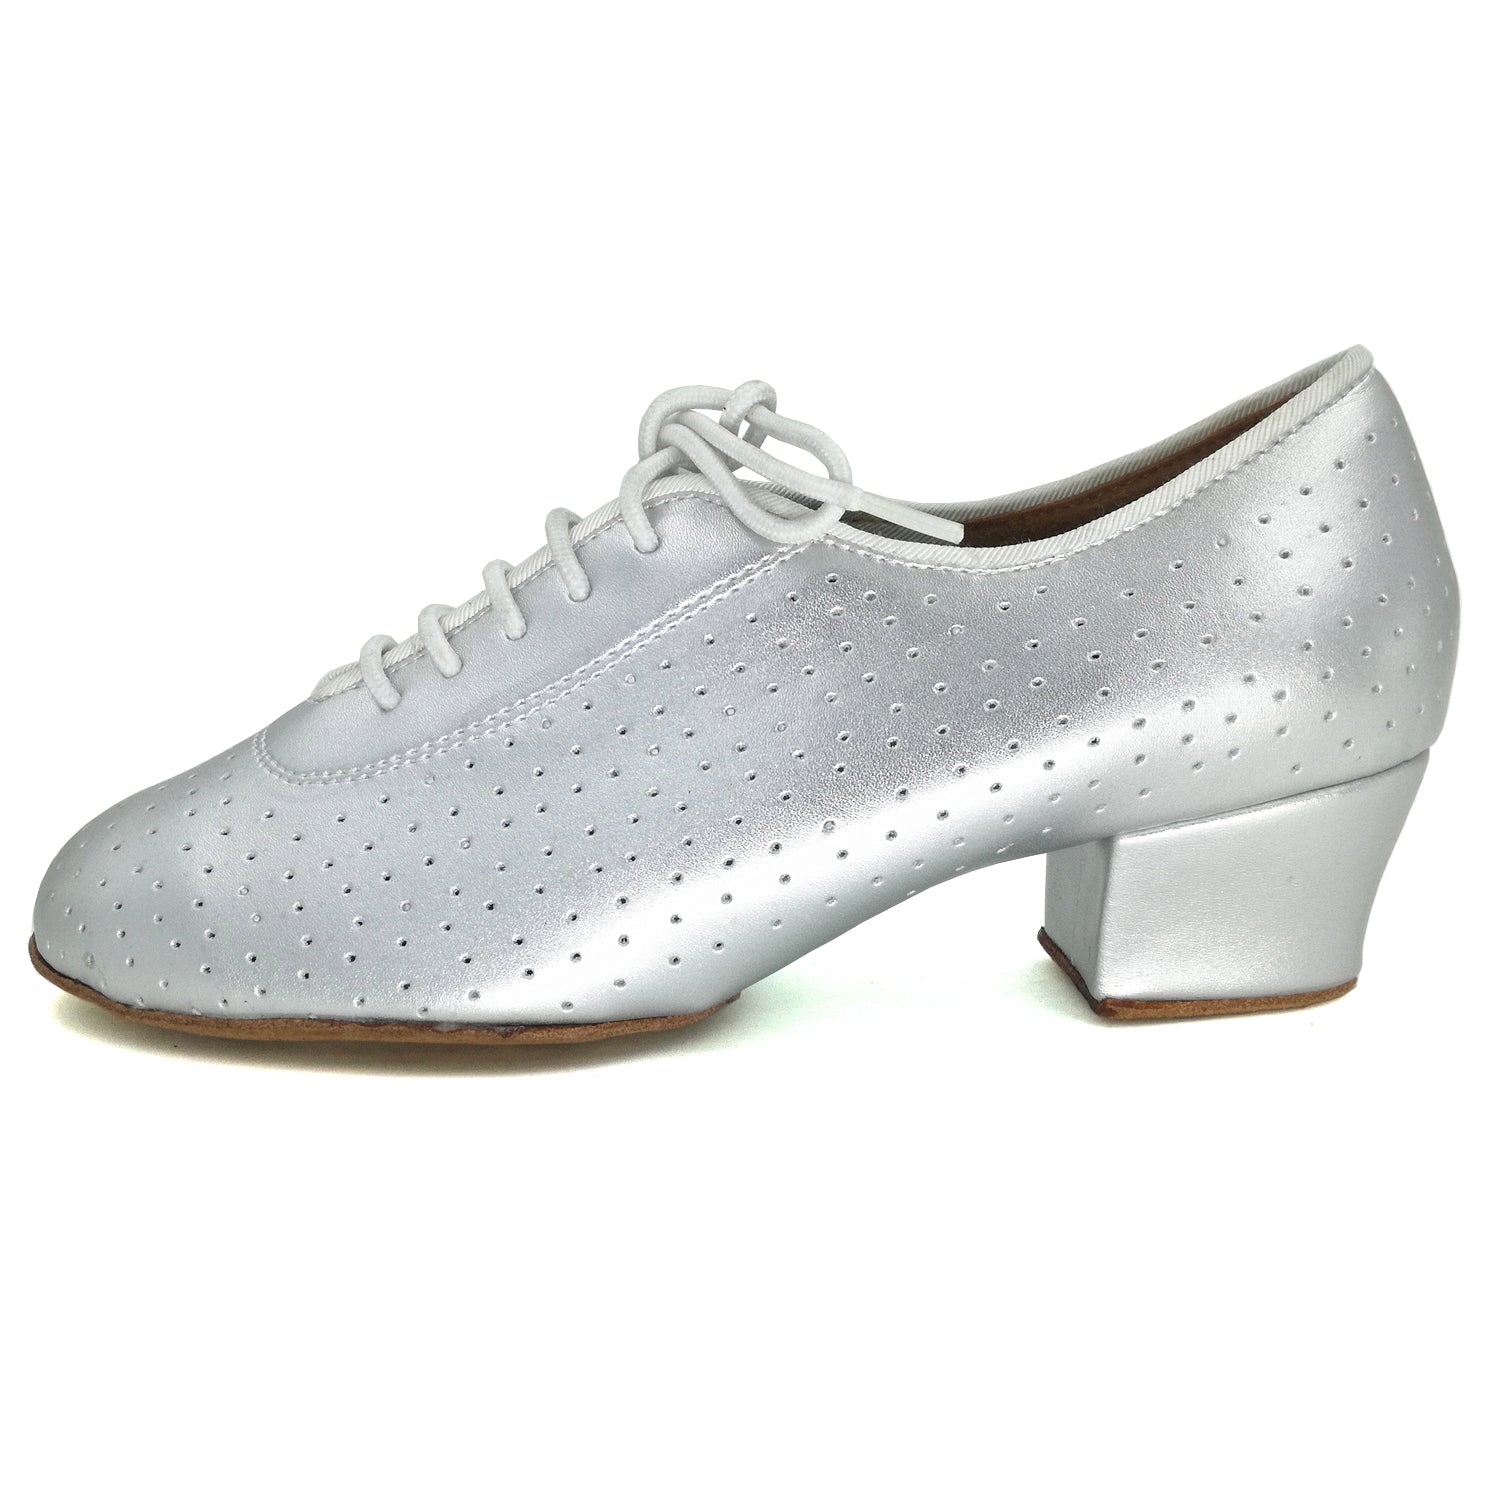 Women Ballroom Dancing Shoes with Suede Sole and Lace-up Closed-toe Design in Silver for Tango Latin Practice (PD5003B)1